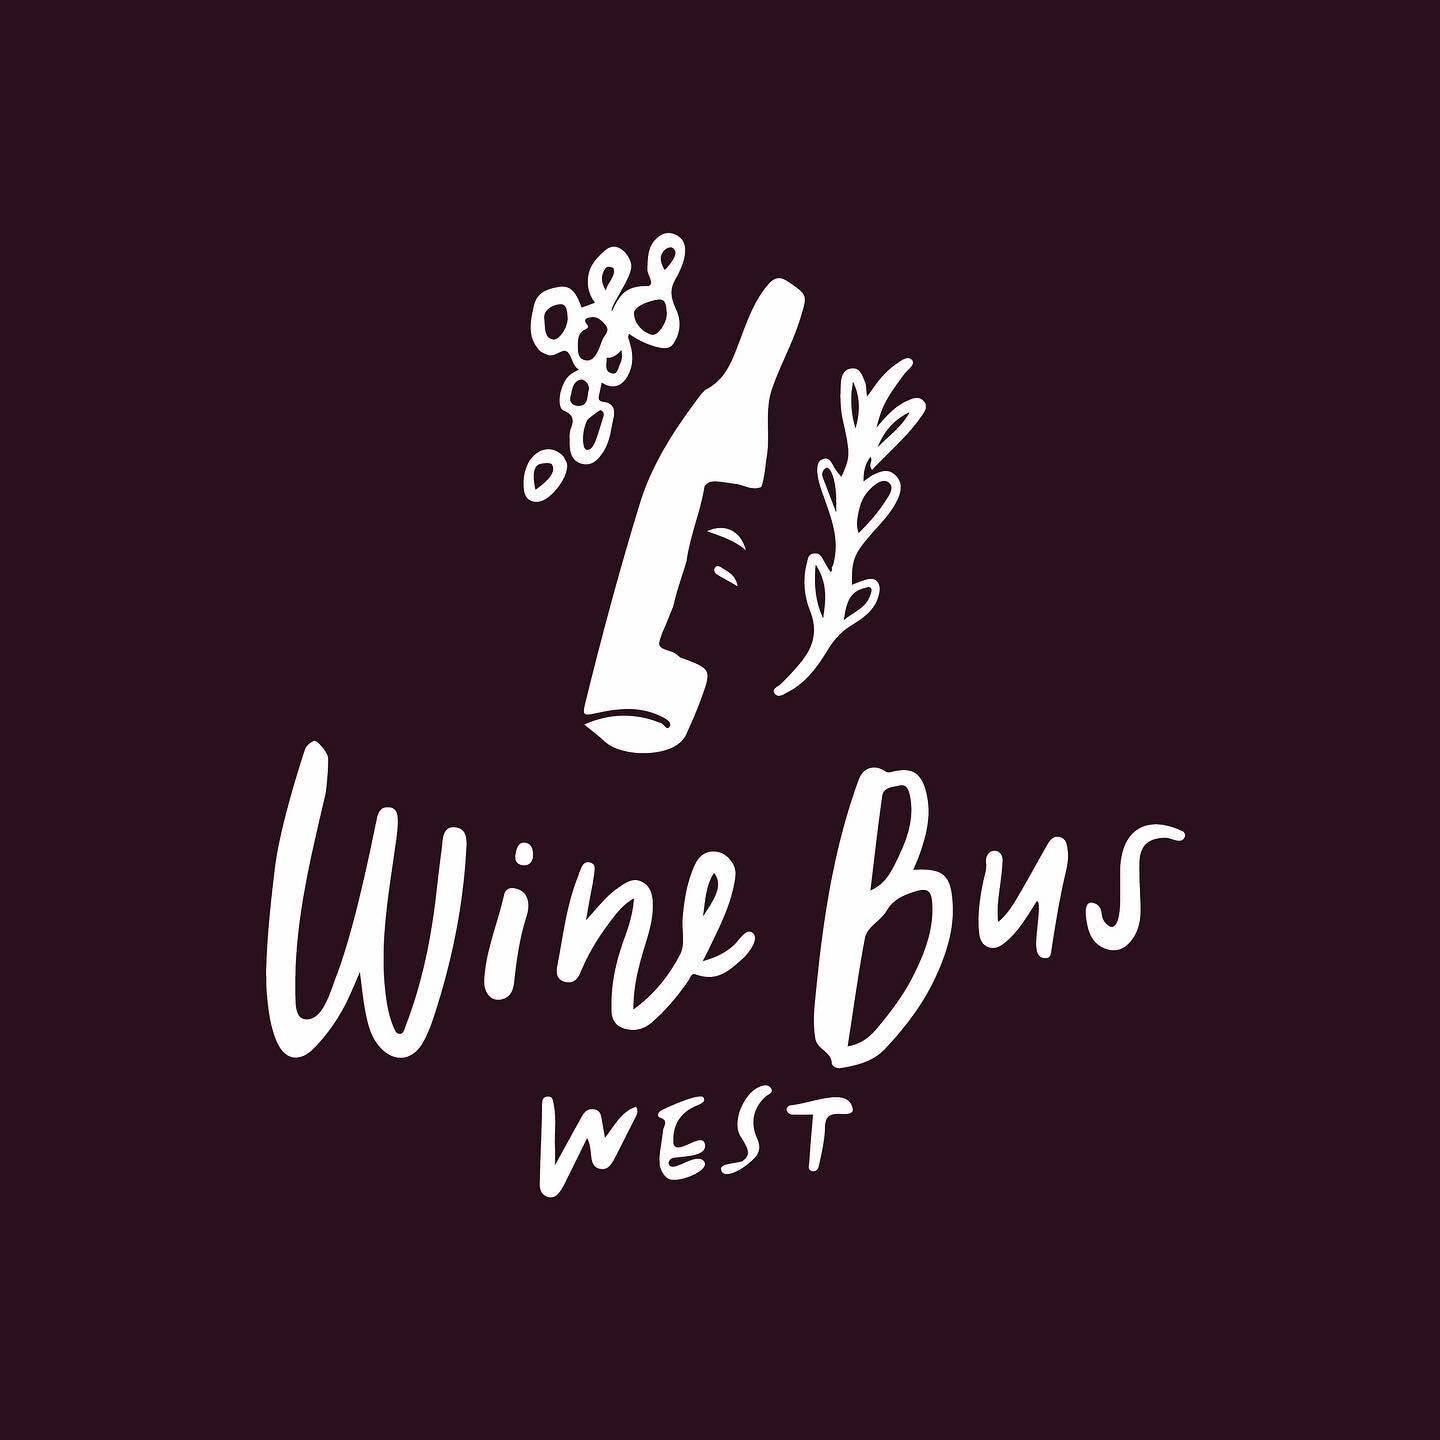 A fun project from the summer, loose and fluid. If you&rsquo;re a beginner looking to learn more about wine, check out @winebuswest - my friend Robyn&rsquo;s side project and blog. Can&rsquo;t wait to see more of what she does! 🍷